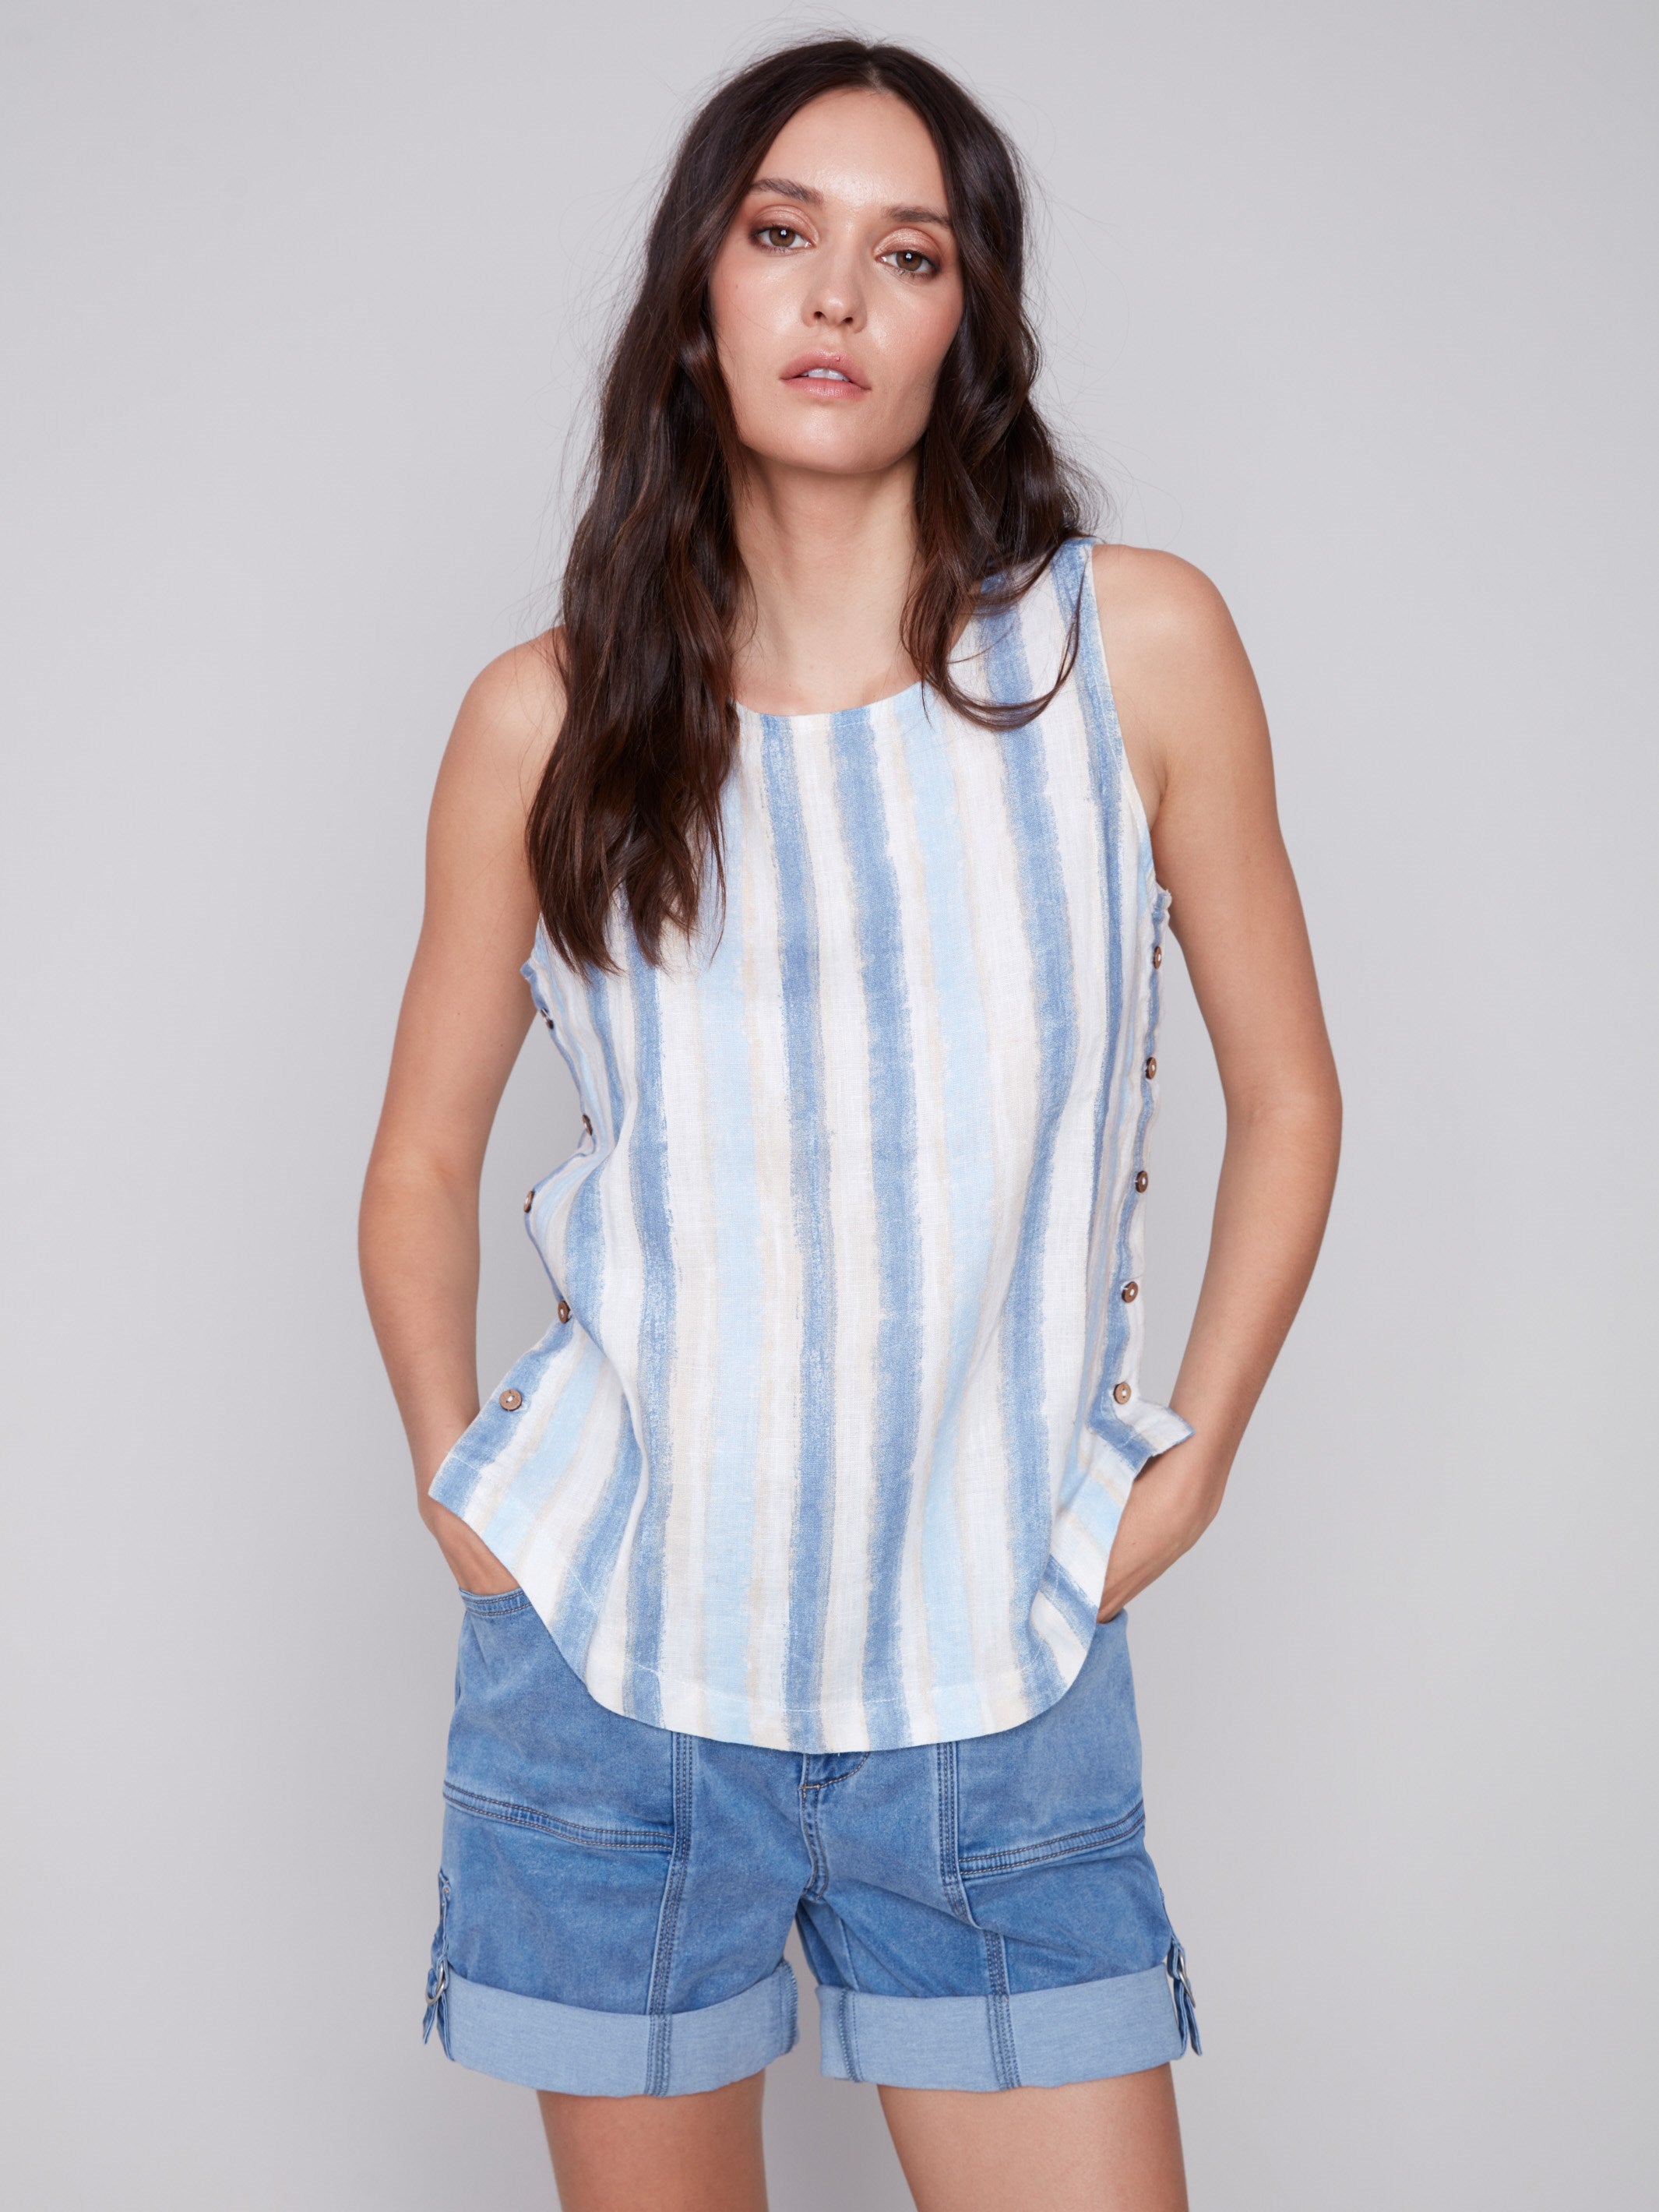 Charlie B Printed Linen Top with Side Buttons - Nautical - Image 4